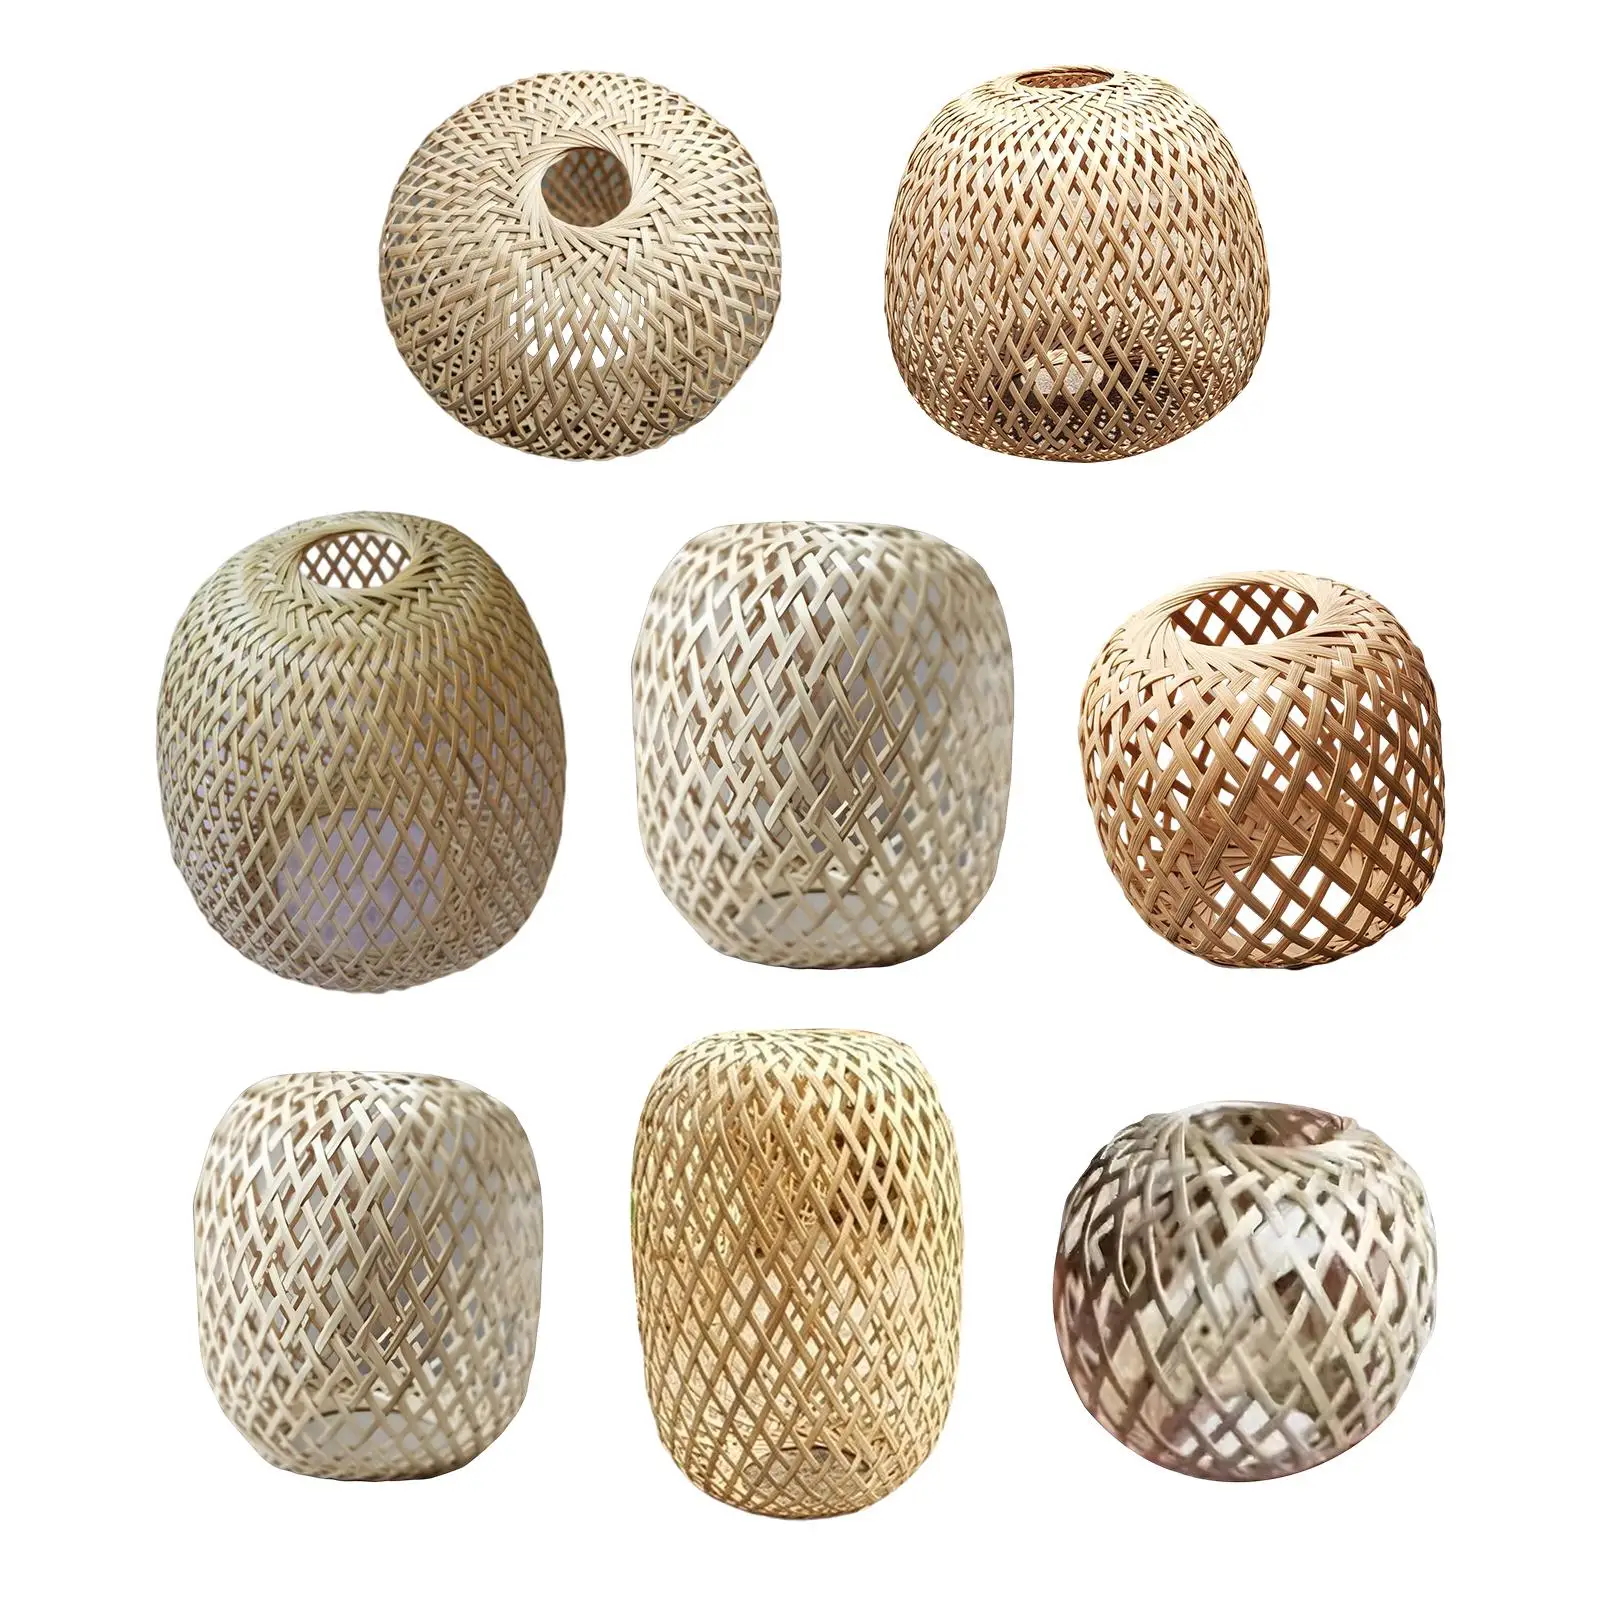 

Pendant Lamp Shade Handmade Weave Ceiling Light Cover Lantern Retro Style Bamboo Woven Lampshade for Teahouse Living Room Office